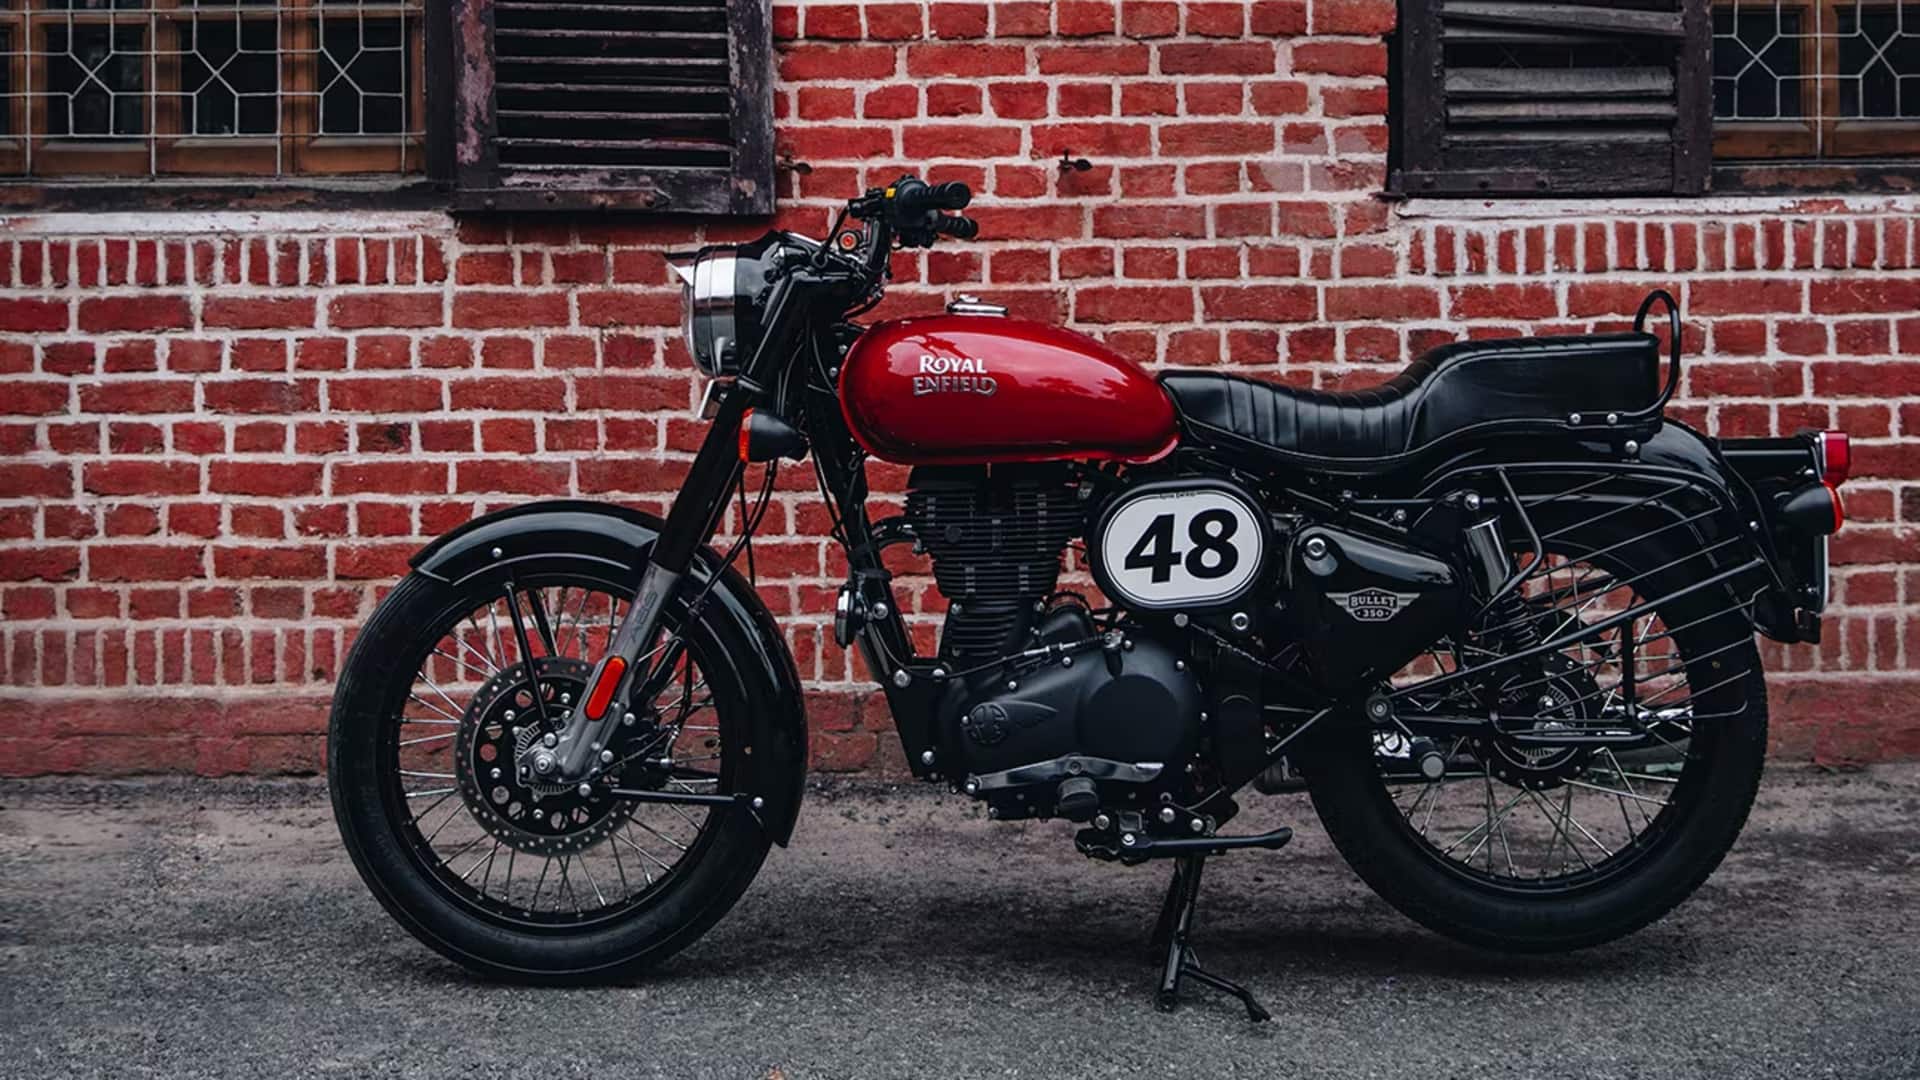 2023 Royal Enfield Bullet 350 to debut on August 30